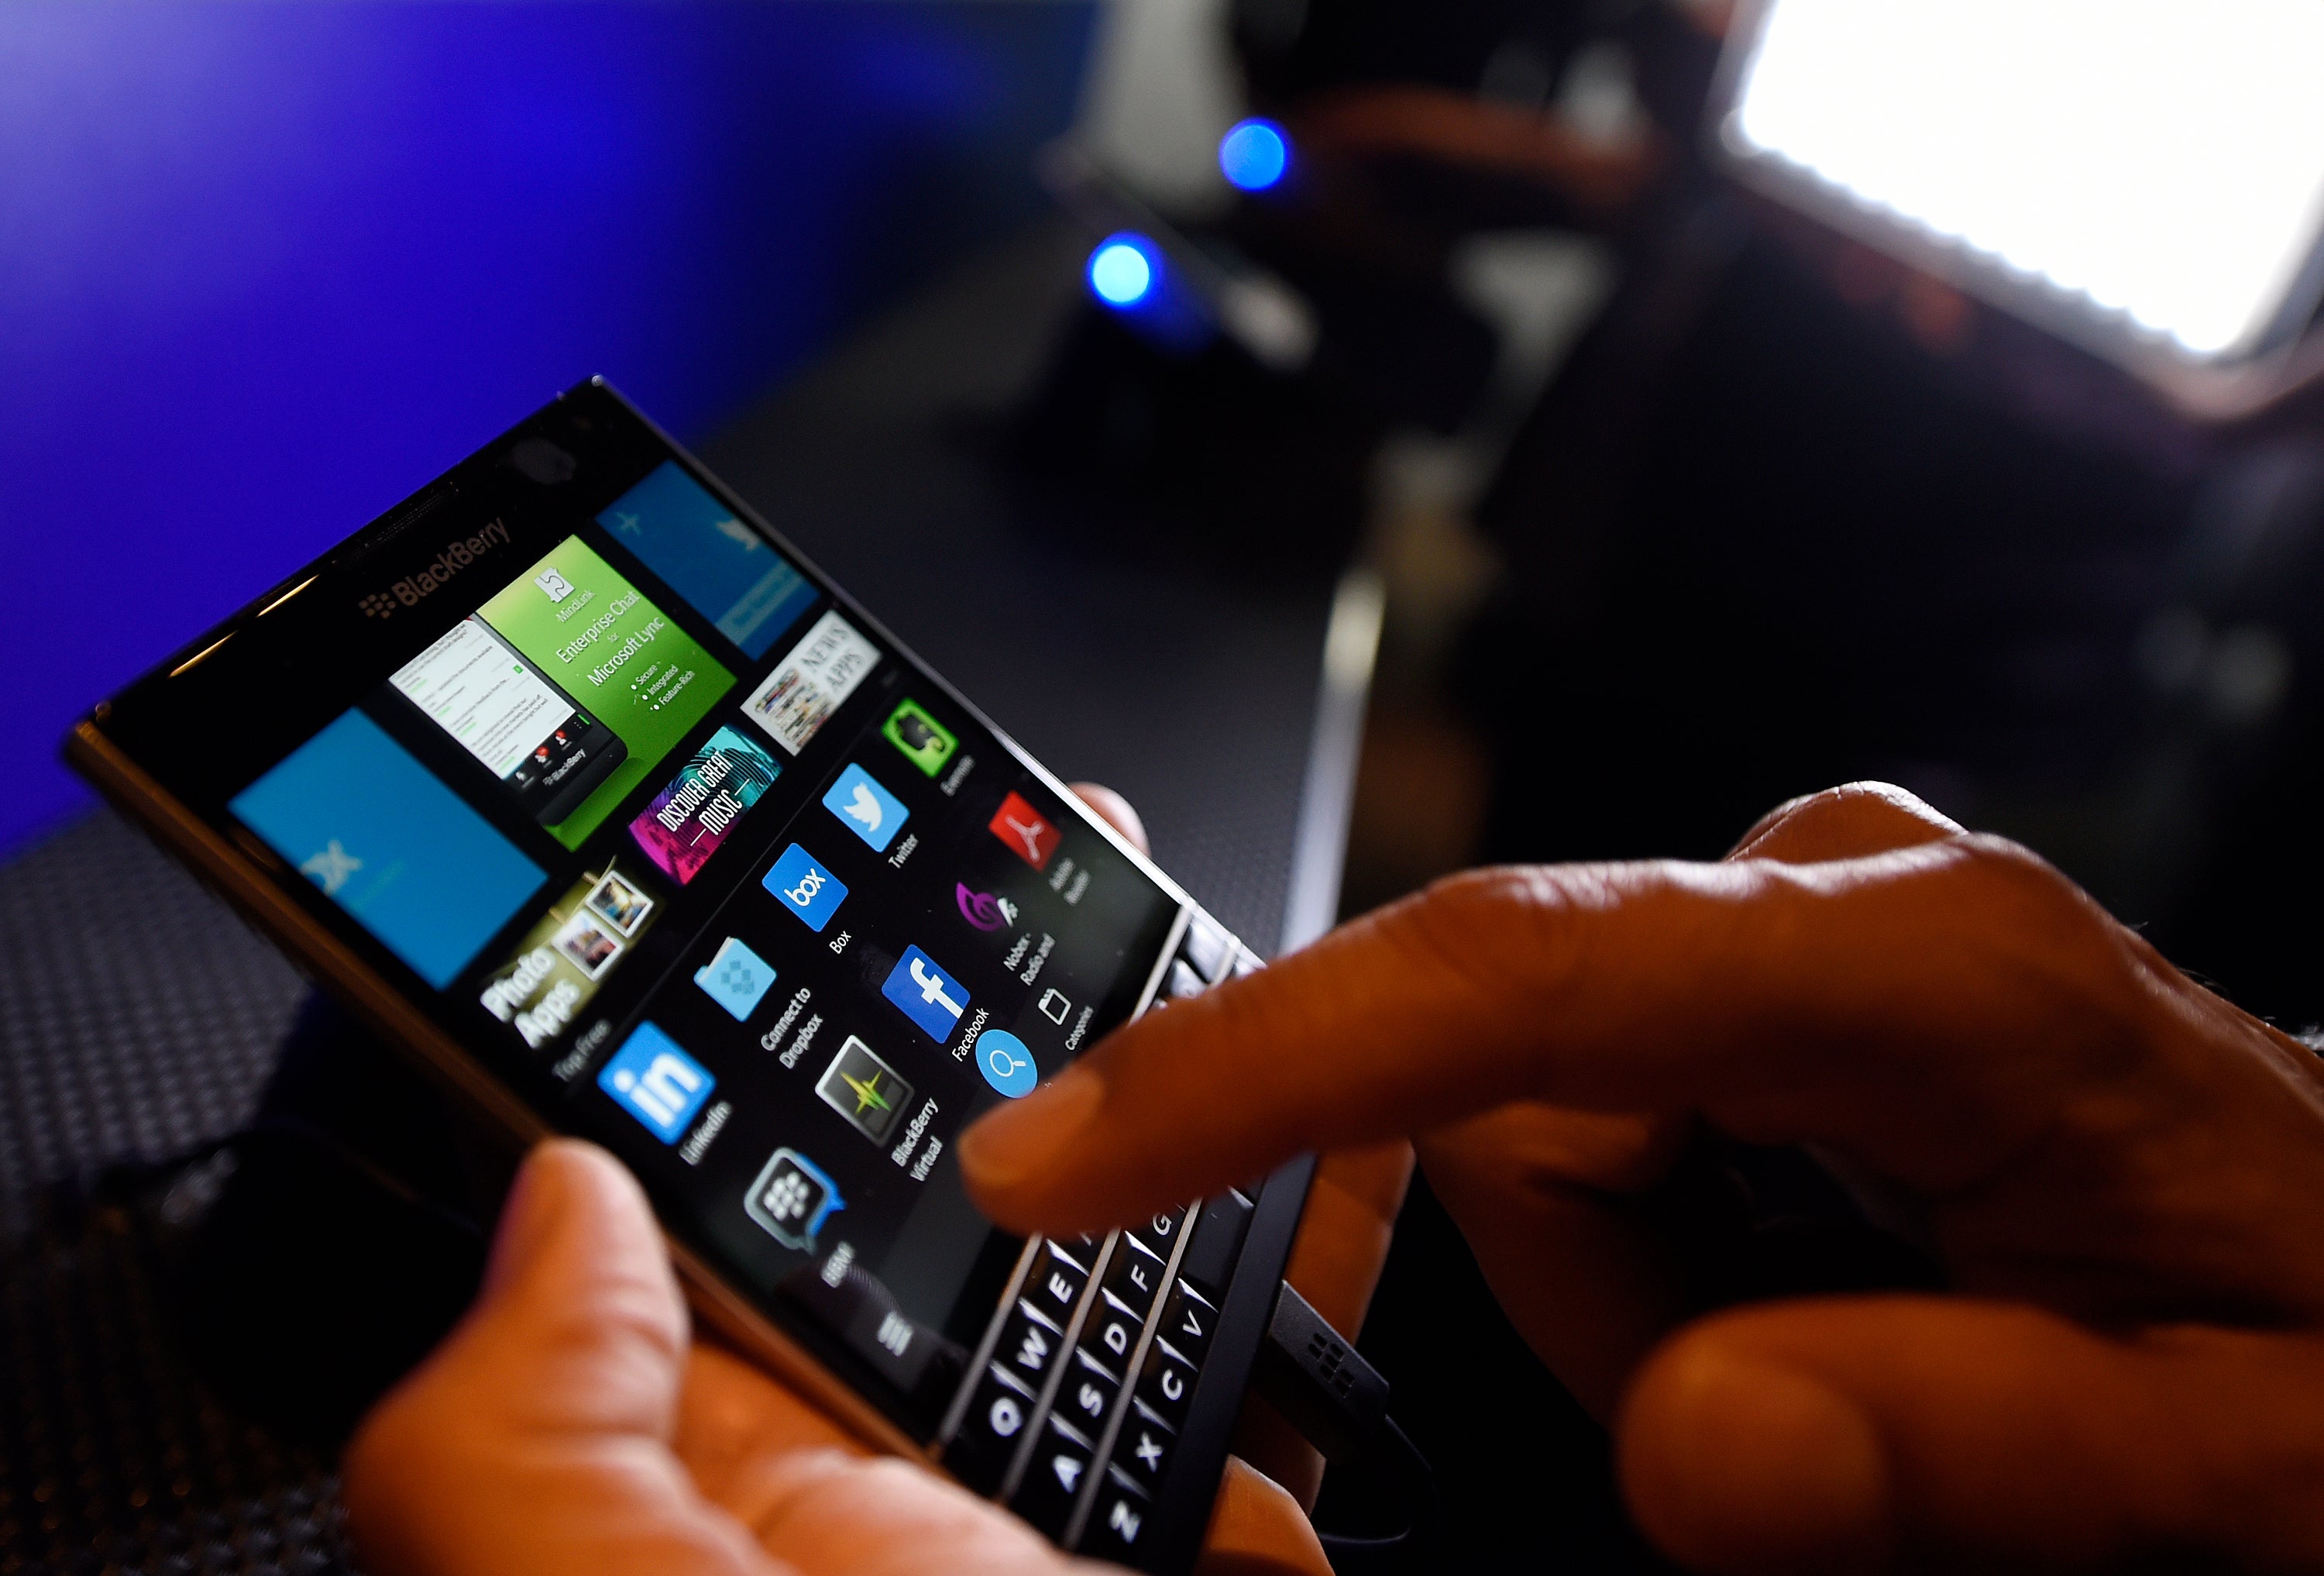 Pre-orders of the Blackberry Passport have sold out